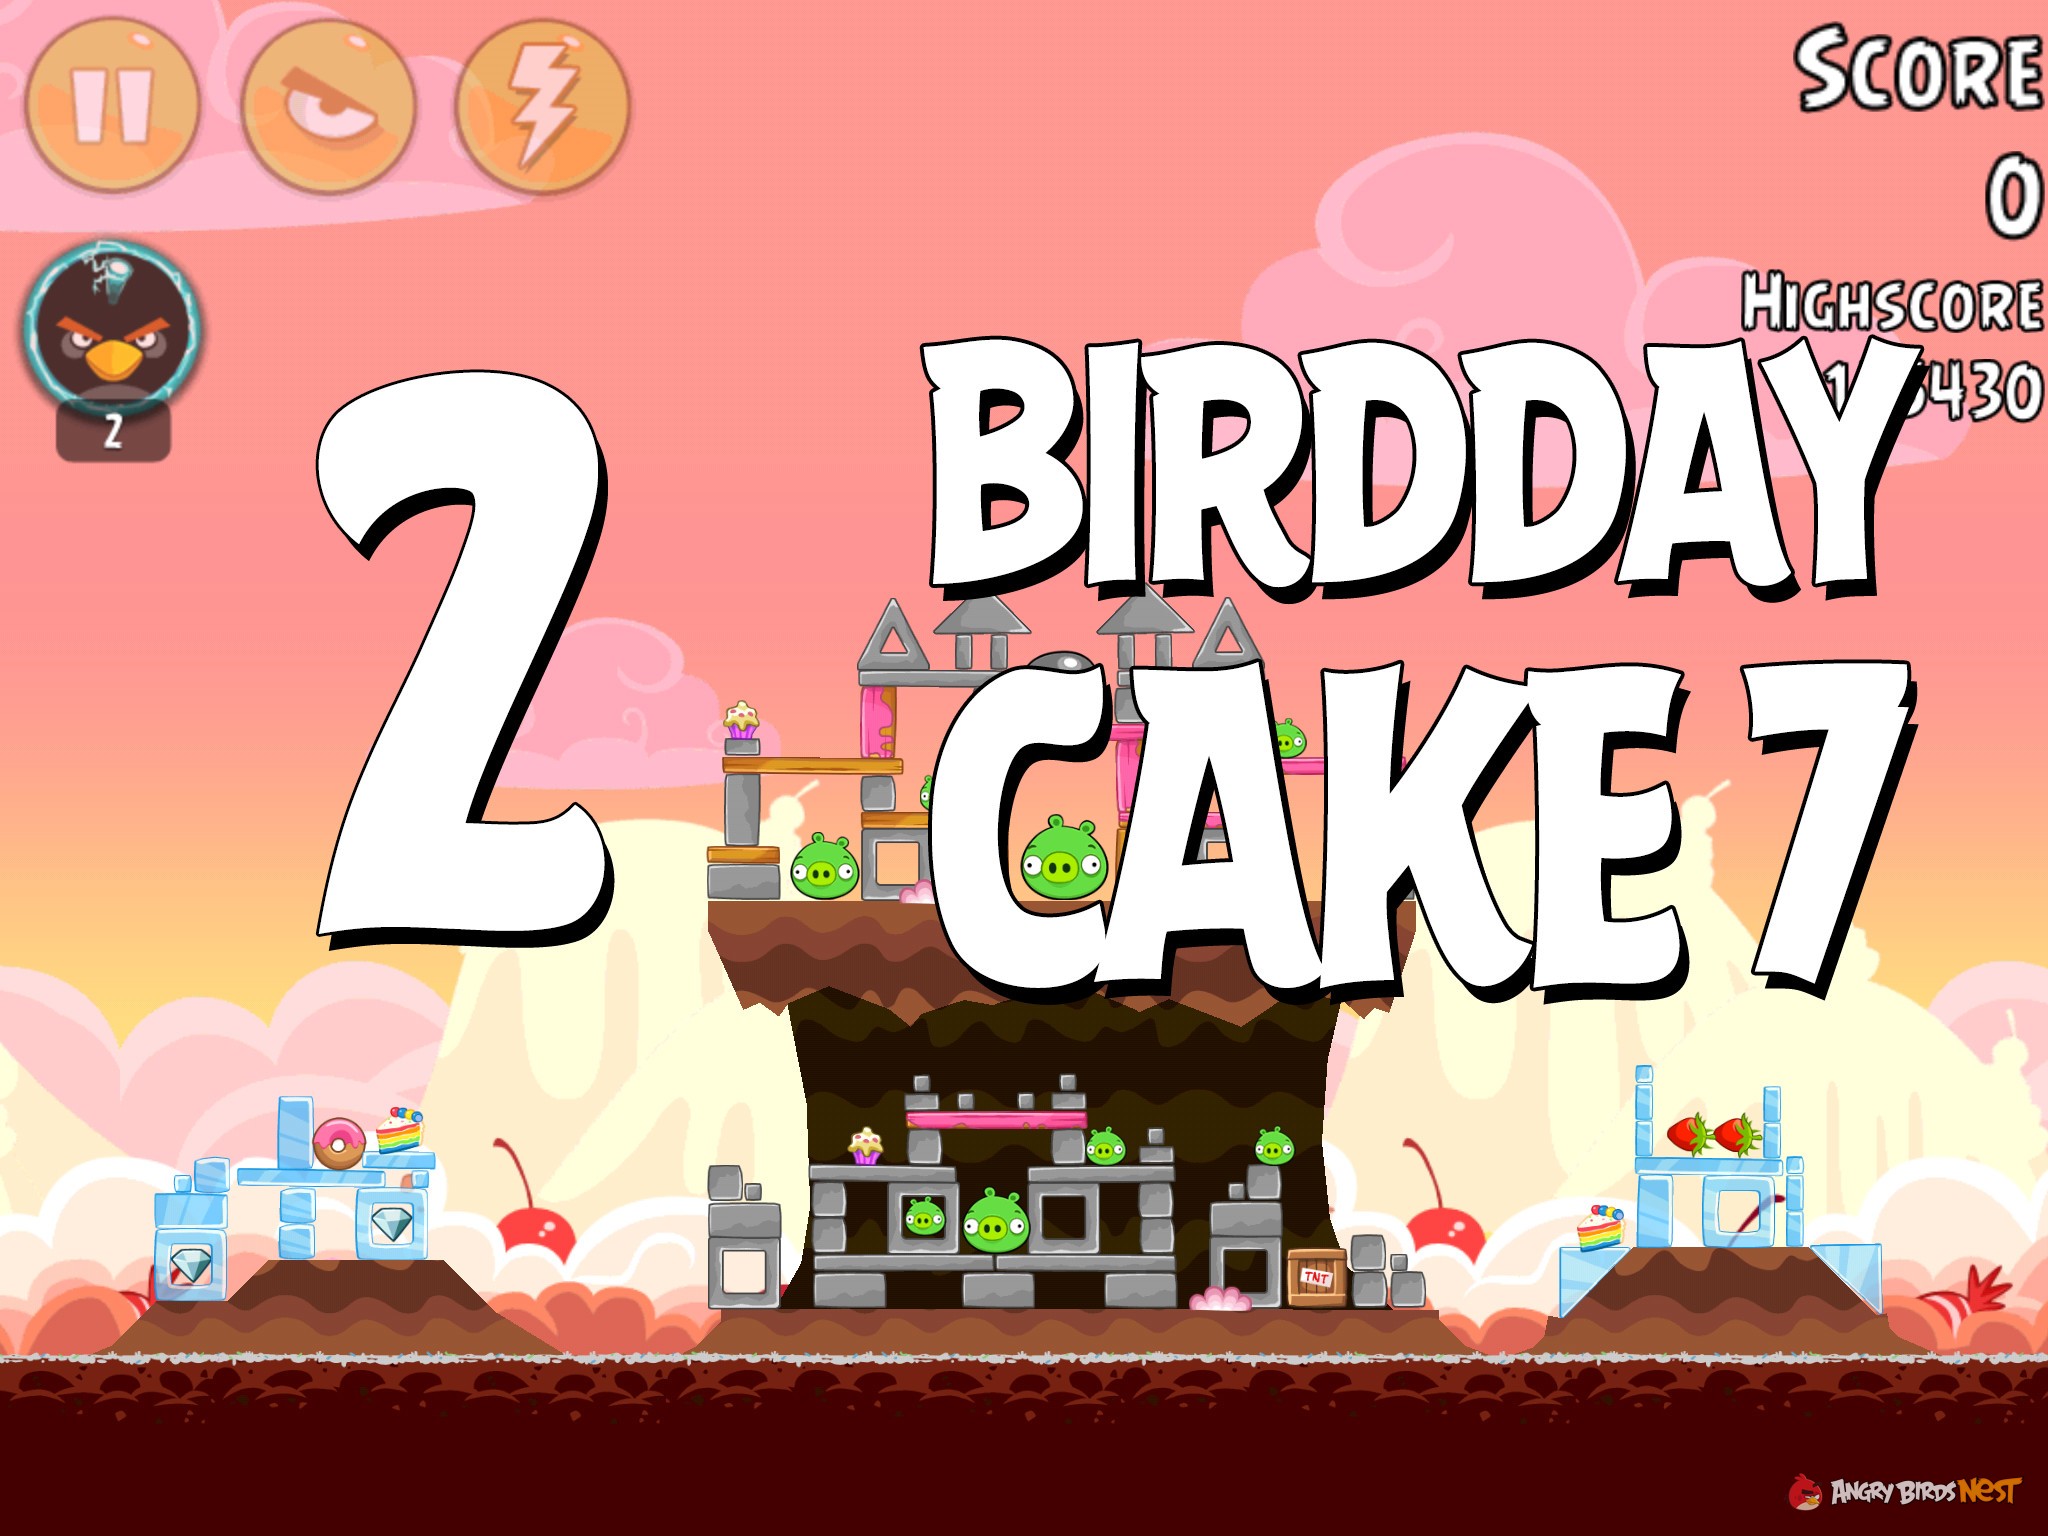 Angry-Birds-Birdday-Party-Cake-7-Level-2